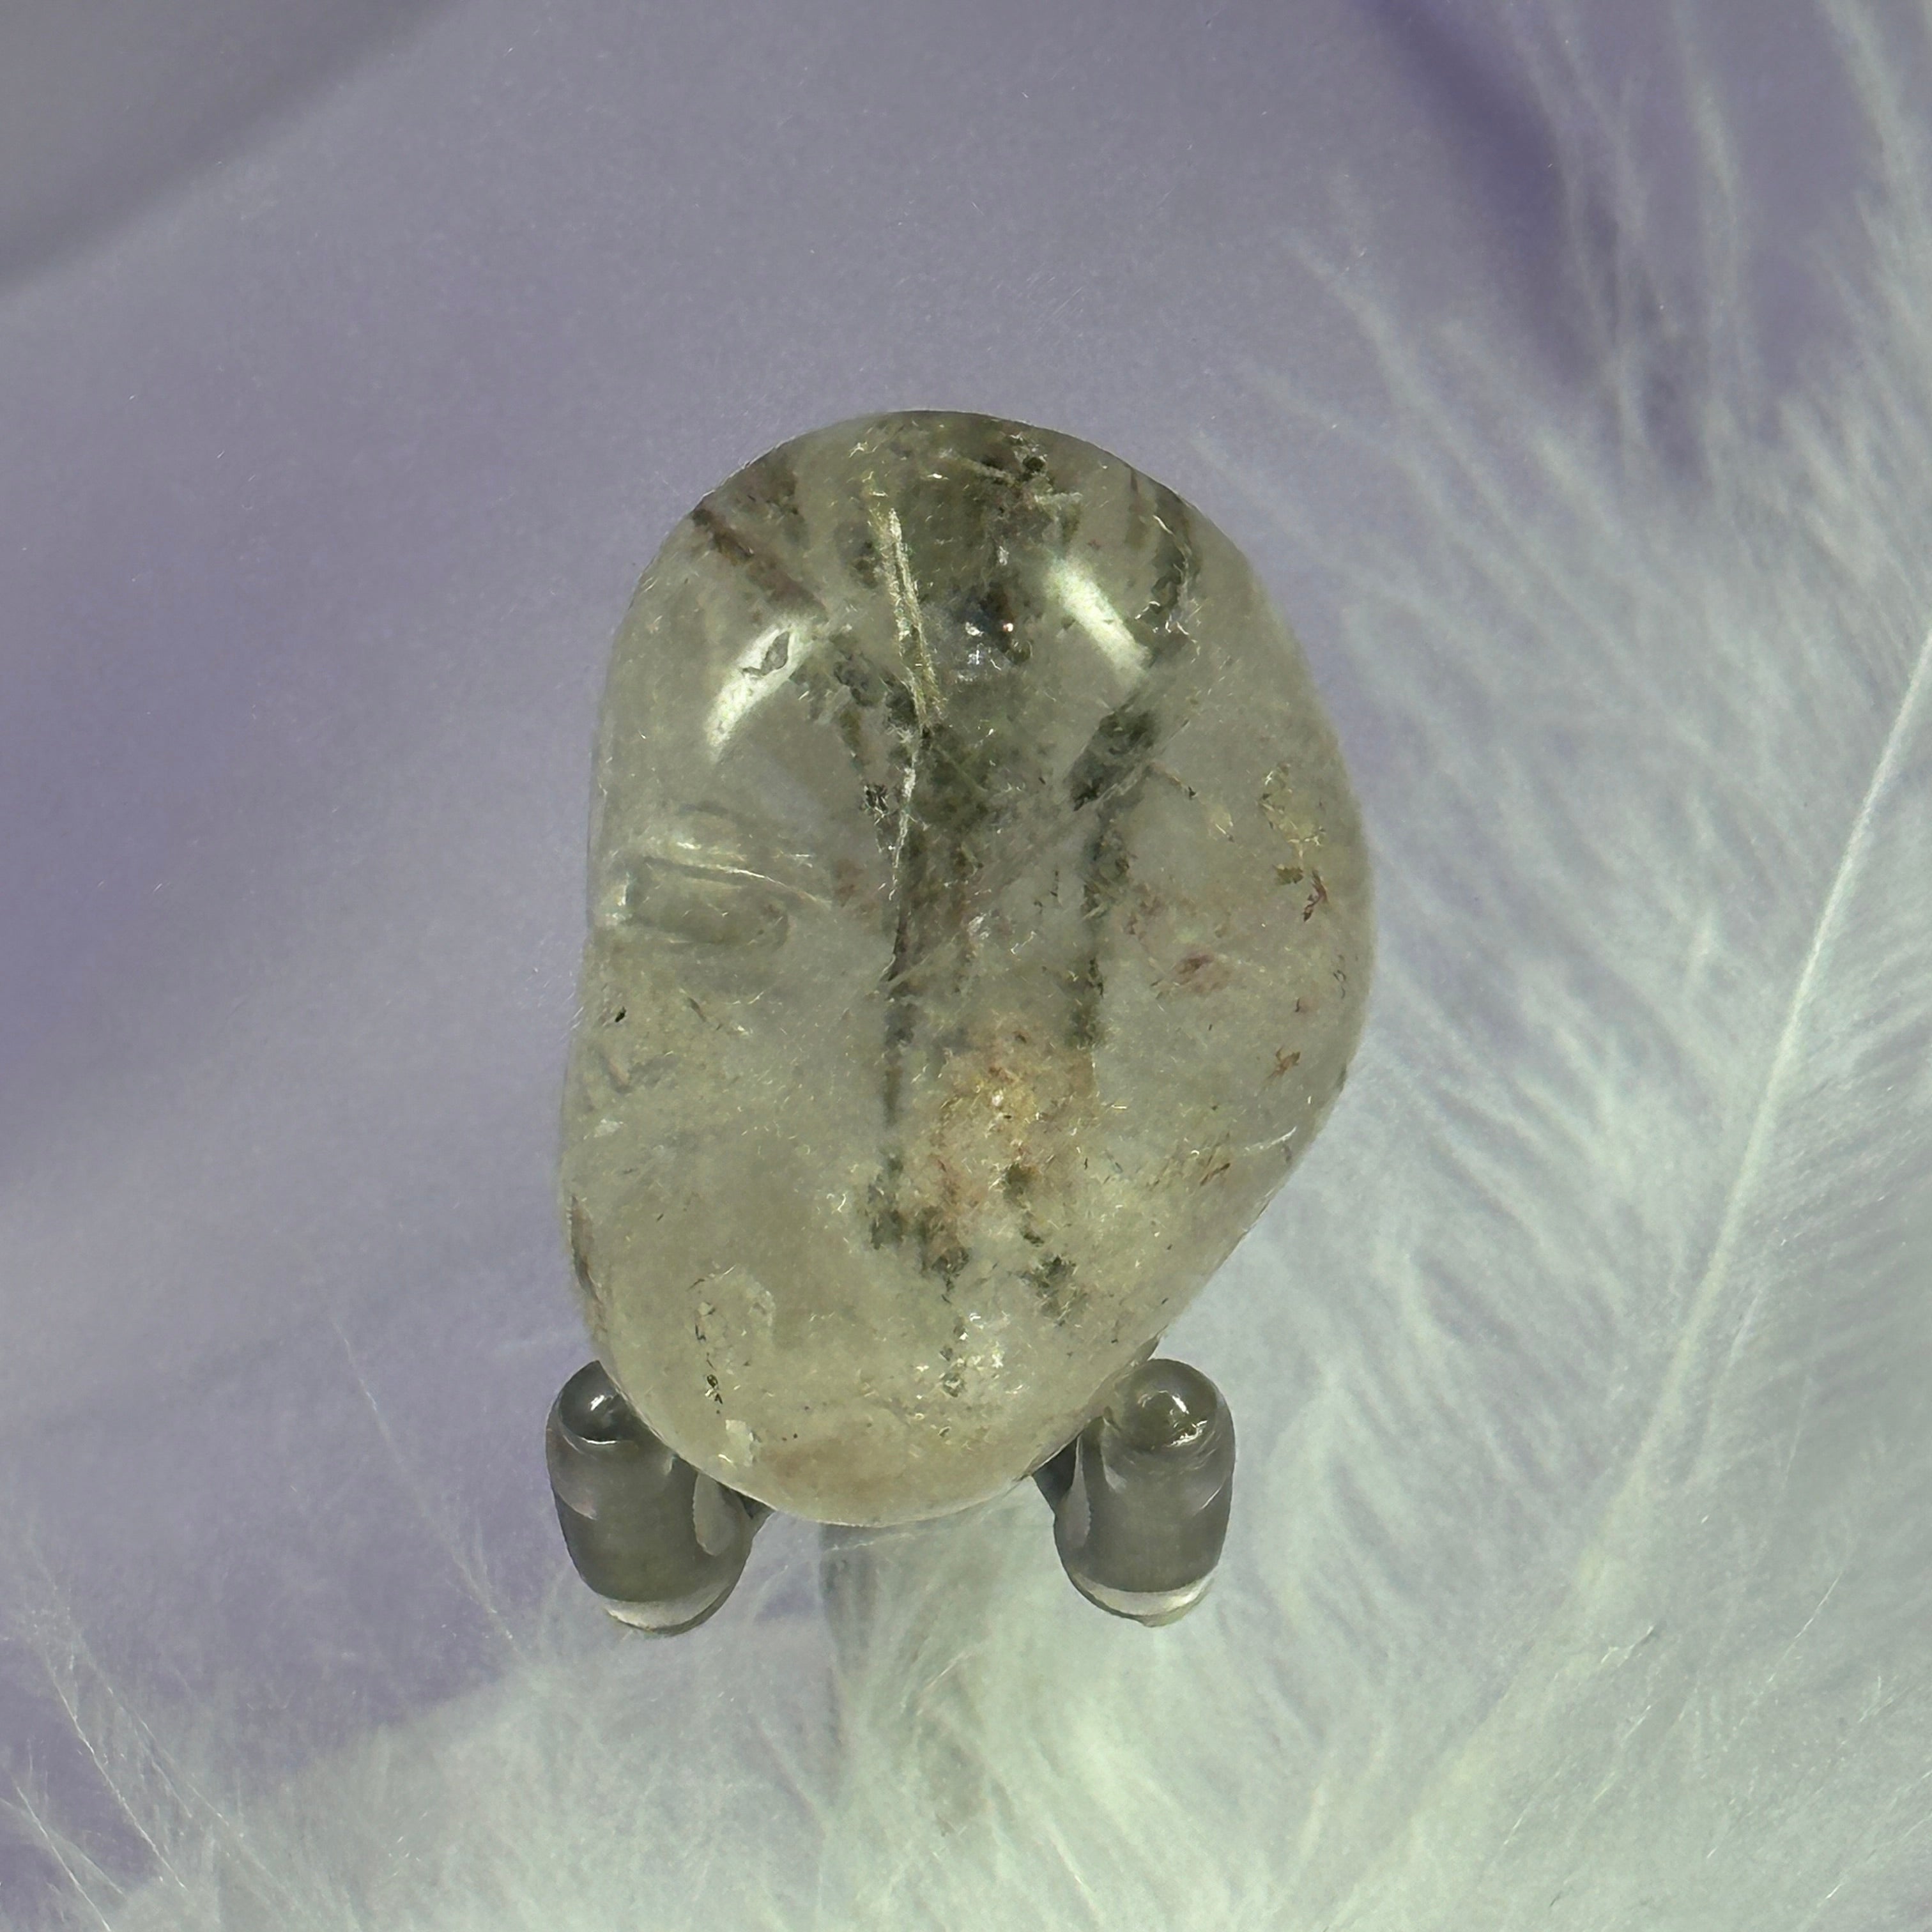 Magdalena Stone, Witches Finger crystal tumble stone 16.4g SN54029